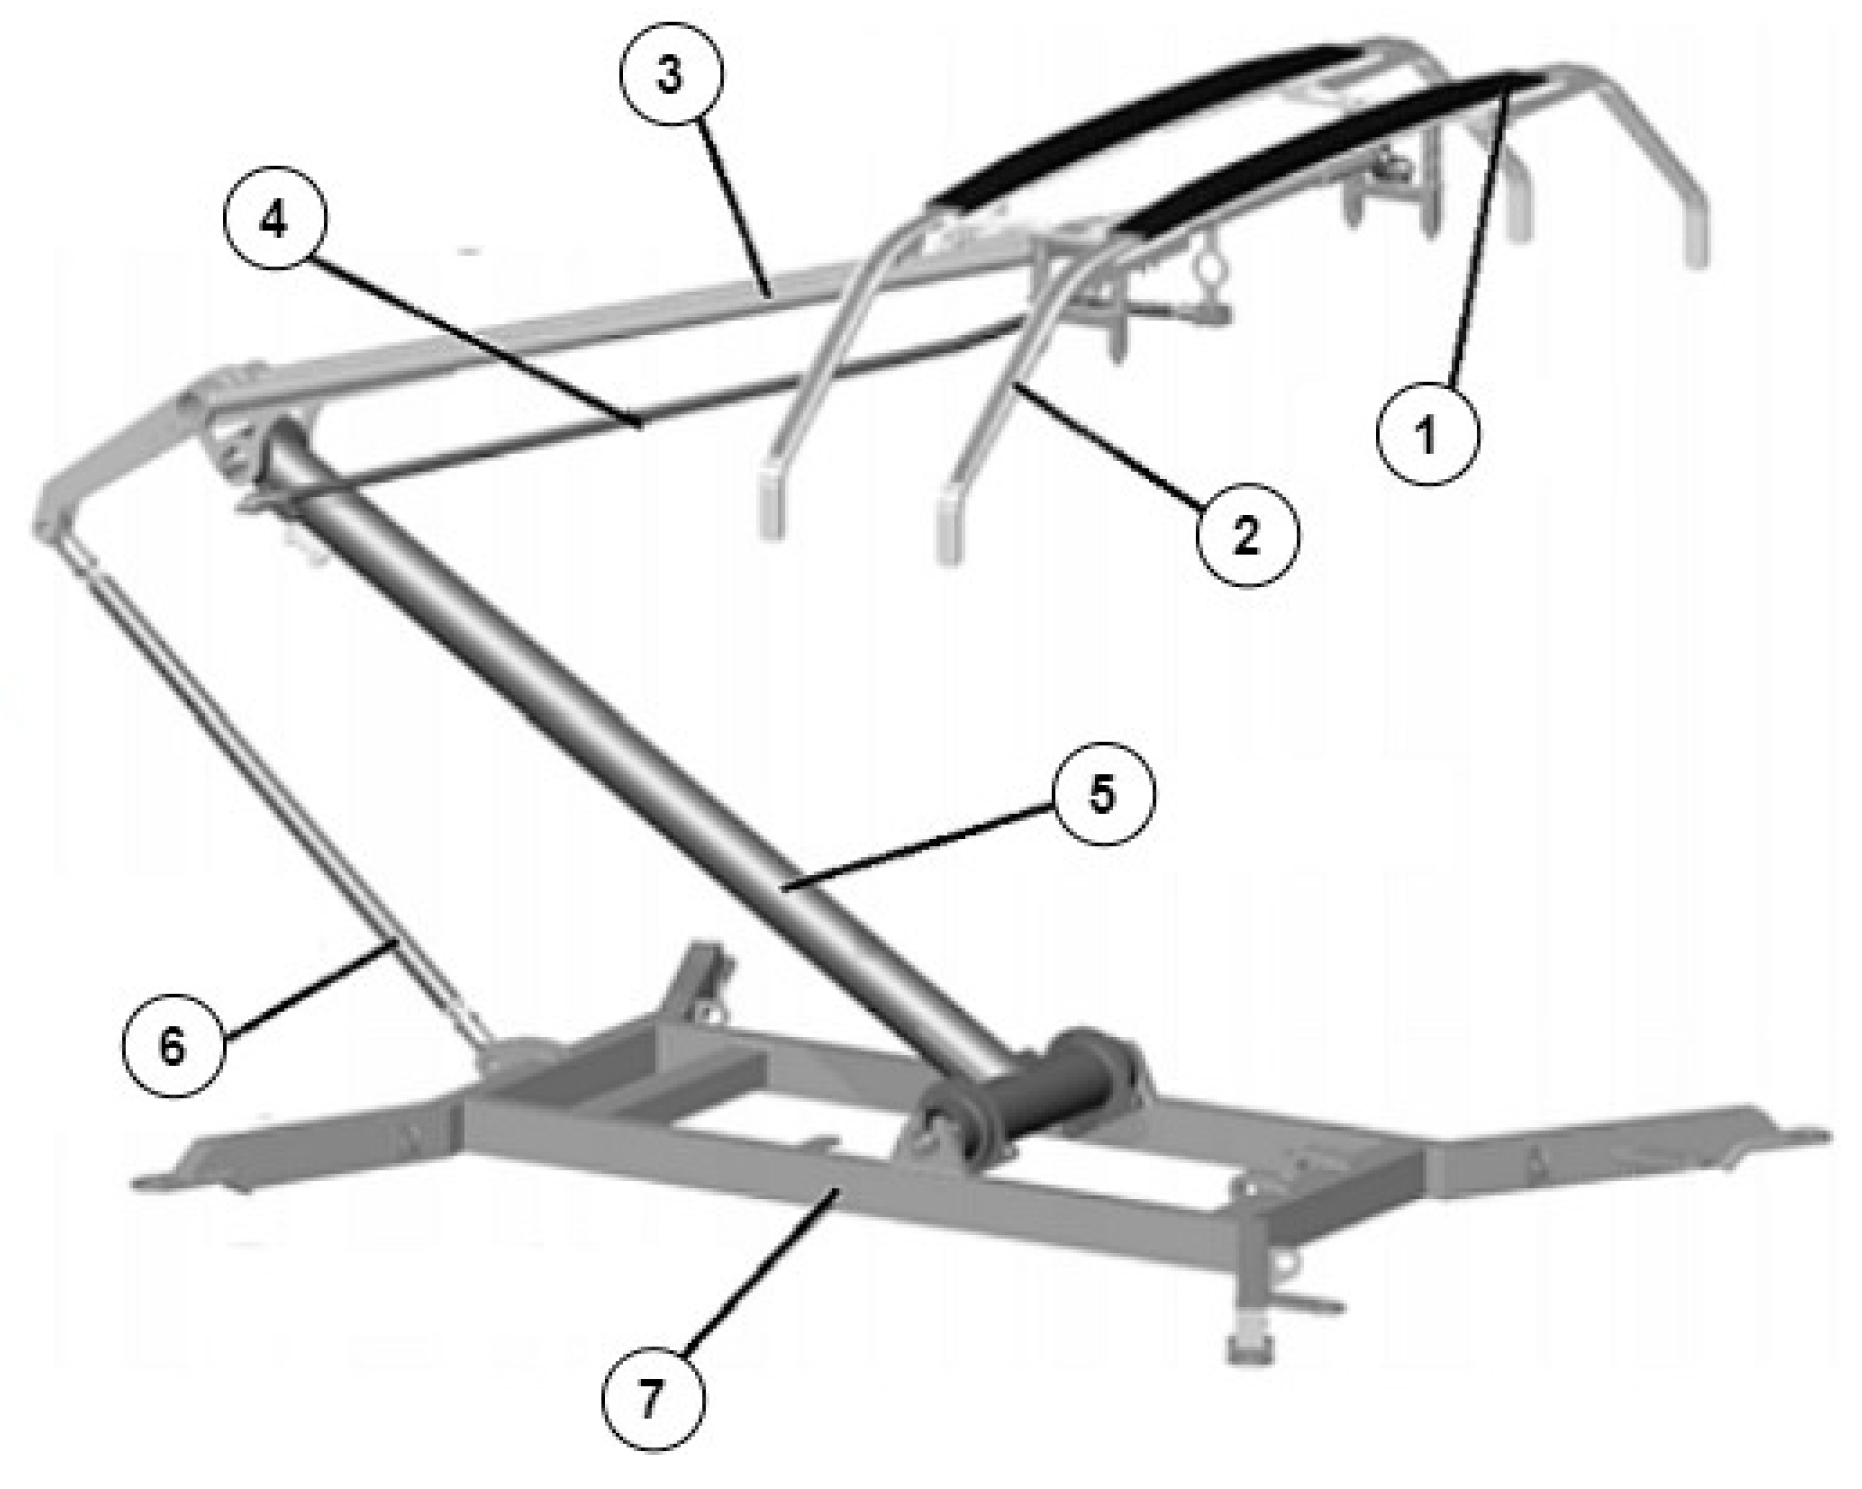 Pantograph model and geometry of the frame.